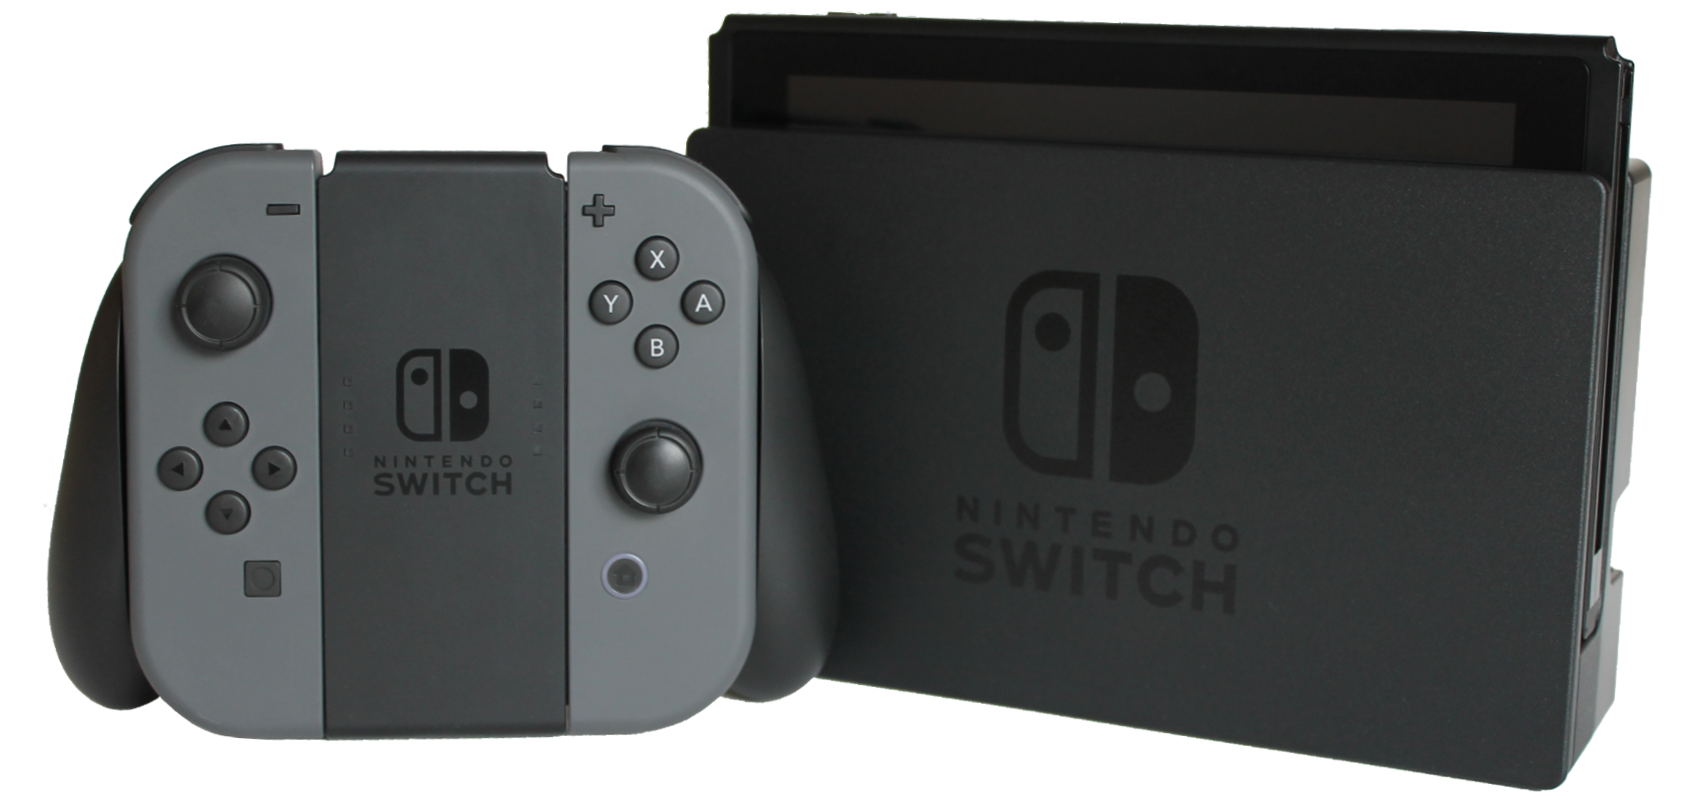 Console PNG High Quality Image